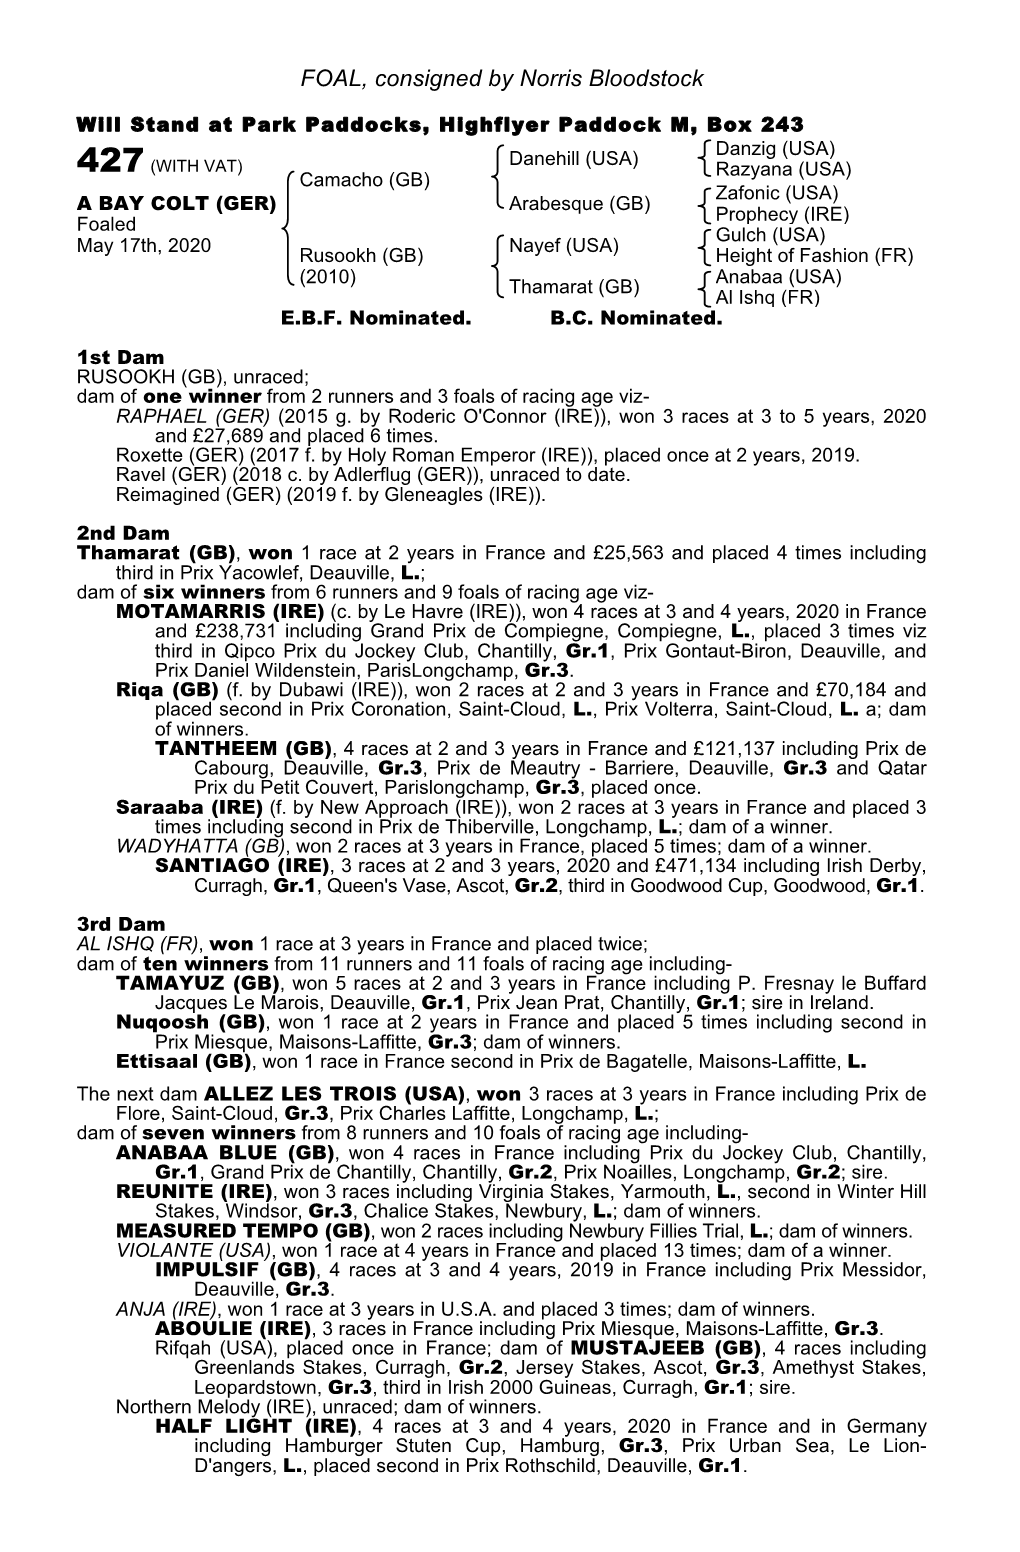 FOAL, Consigned by Norris Bloodstock